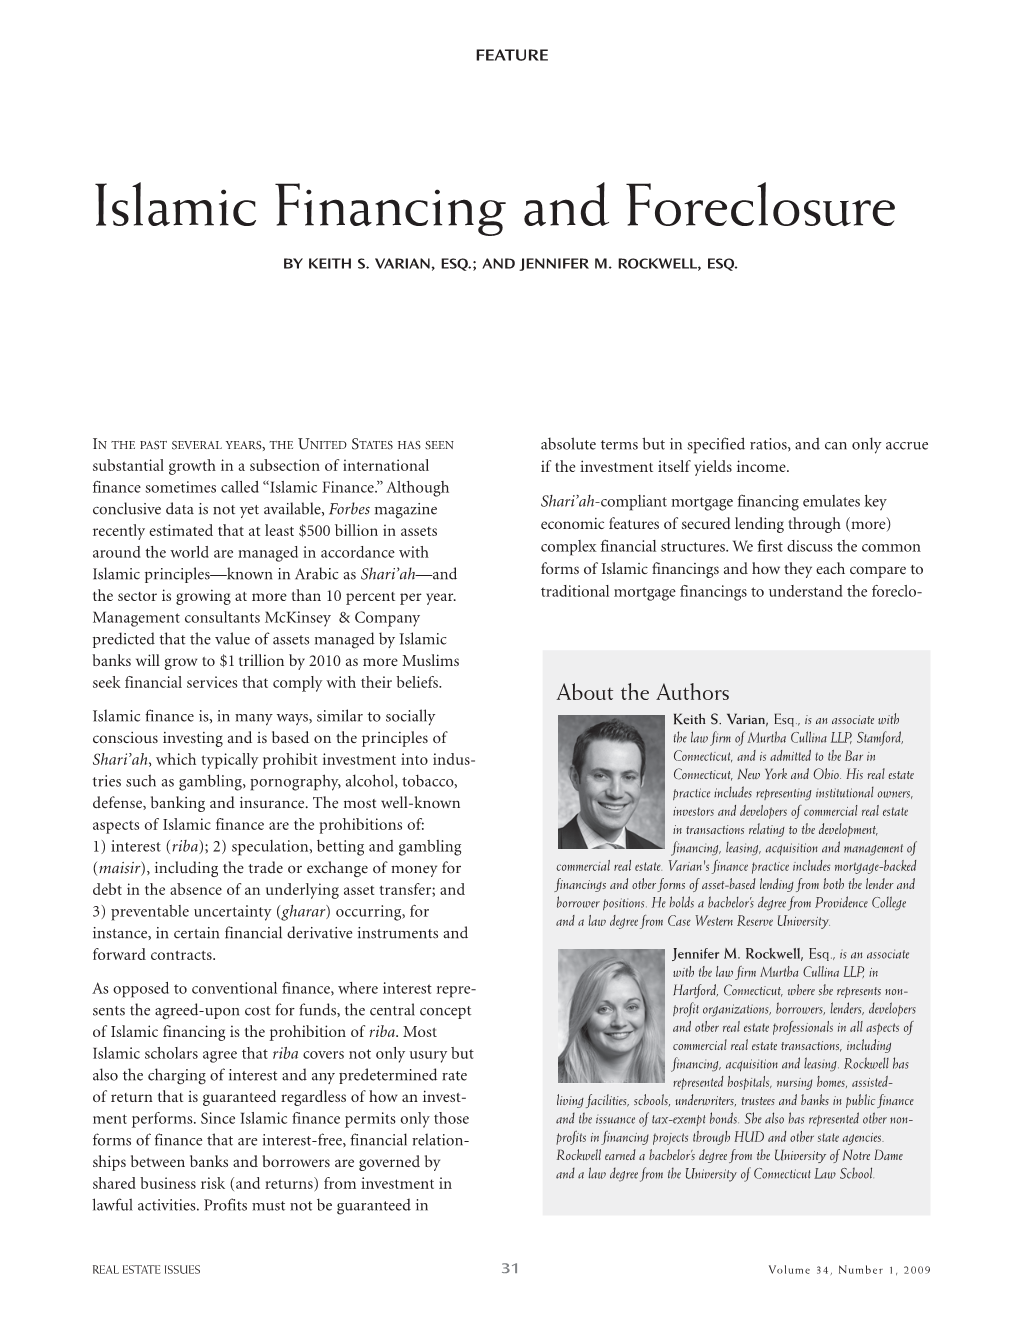 Islamic Financing and Foreclosure